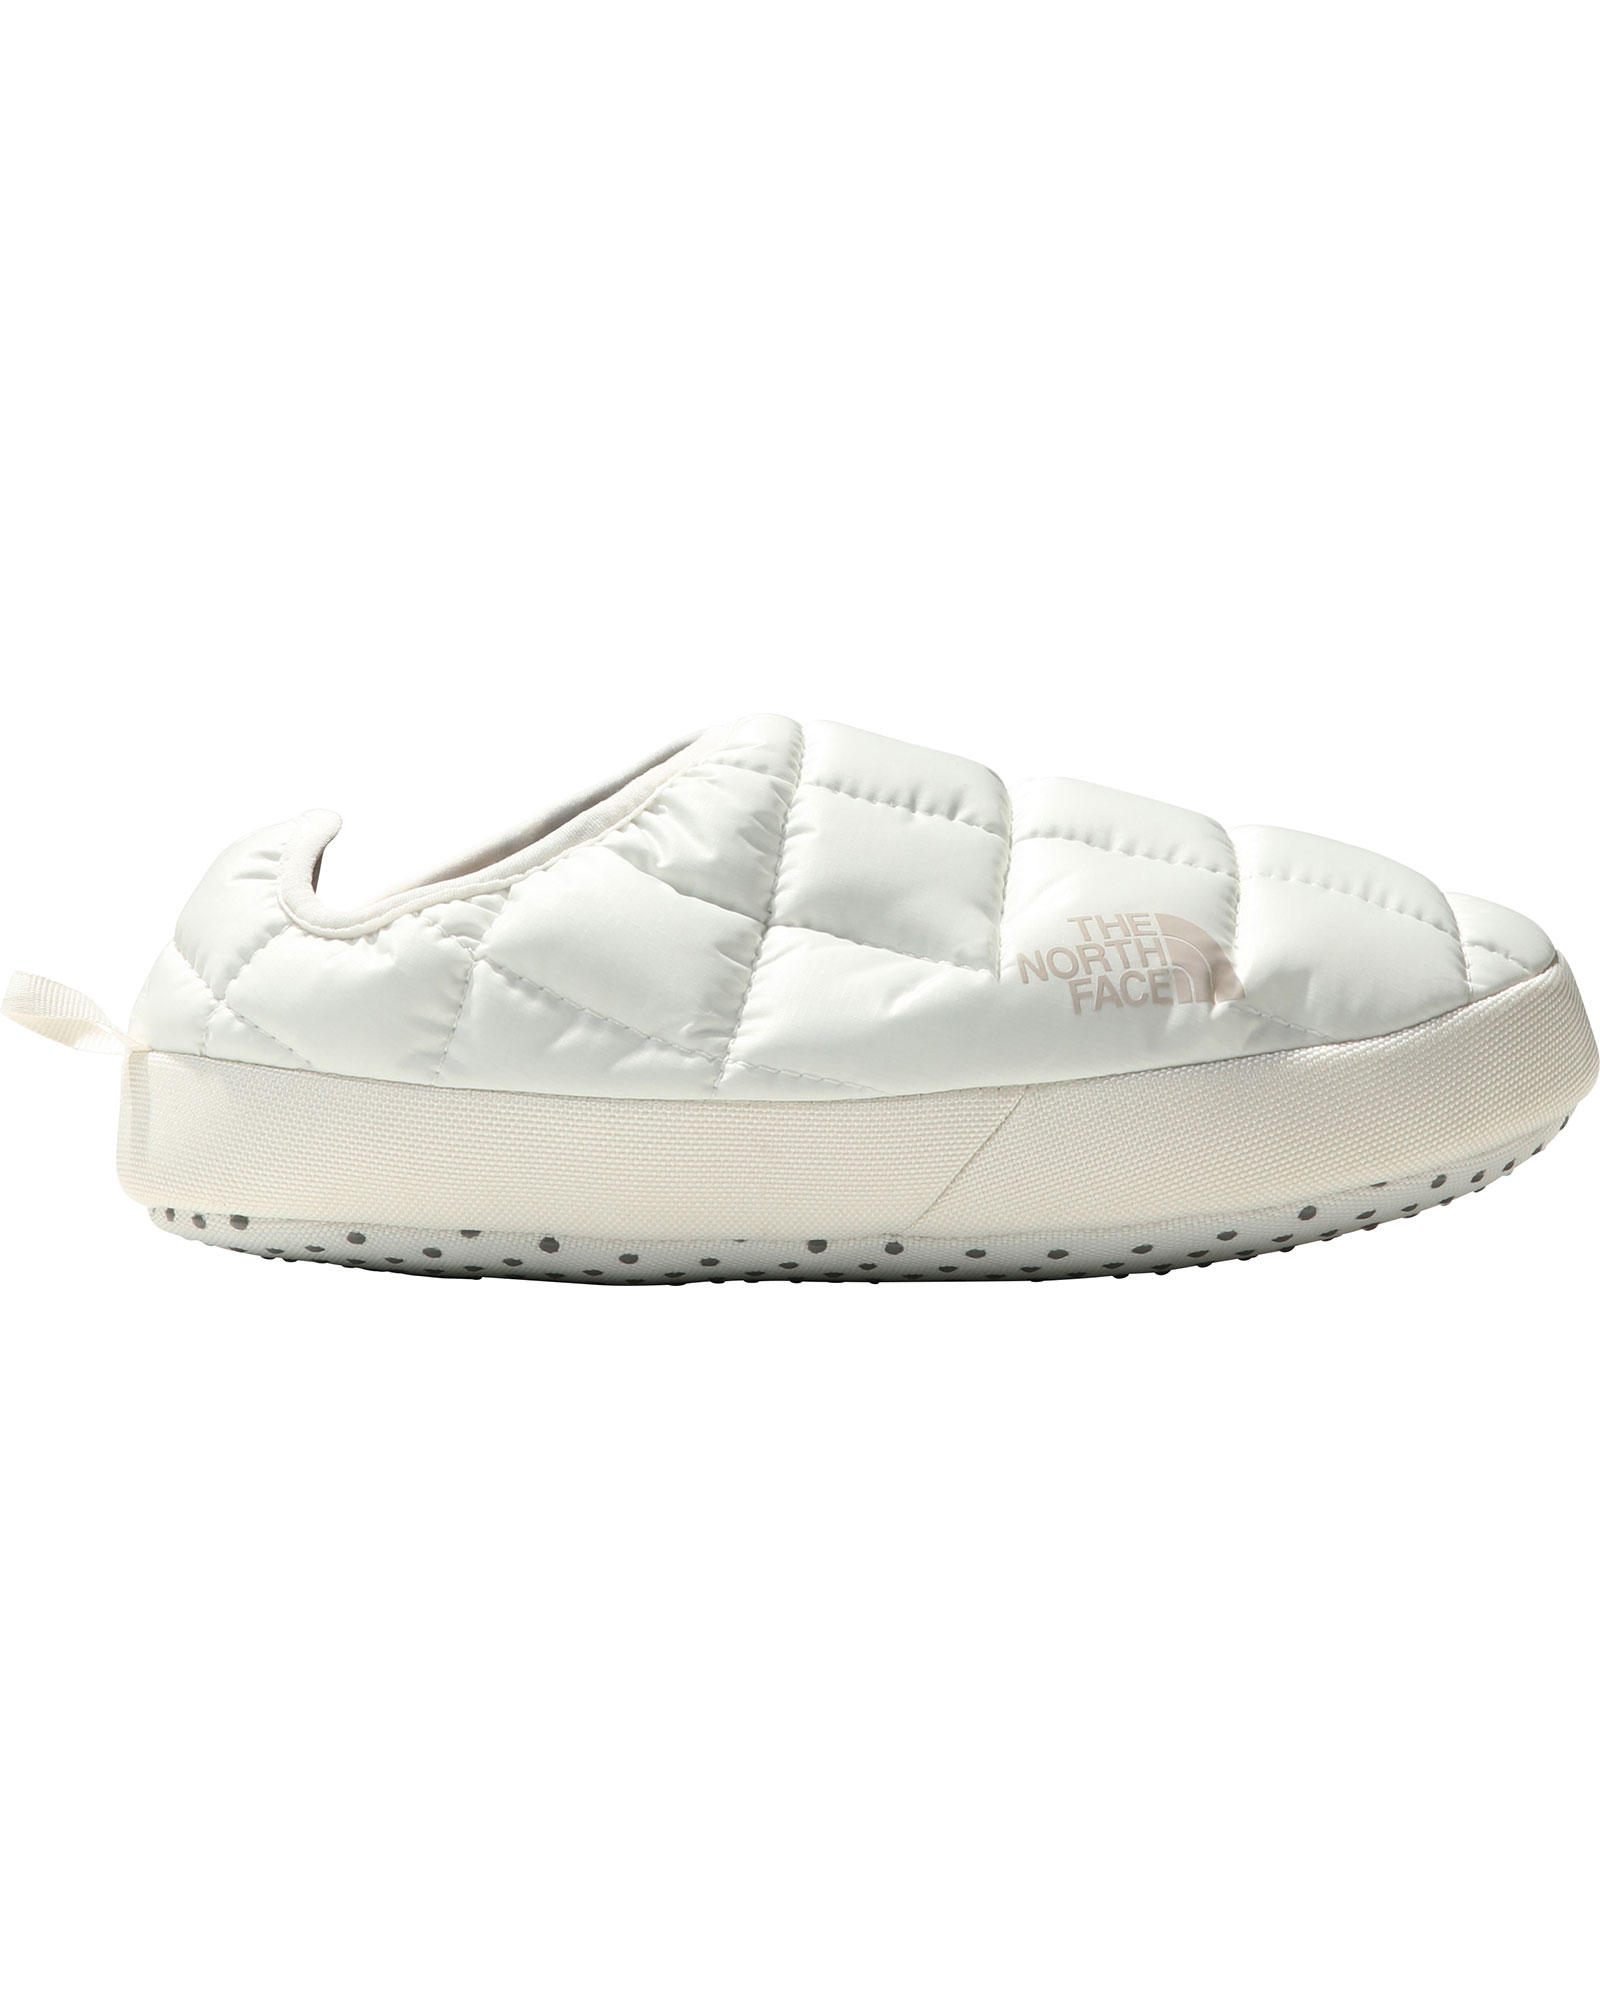 The North Face Women’s ThermoBall V Mules - Gardenia White/Silver Grey M